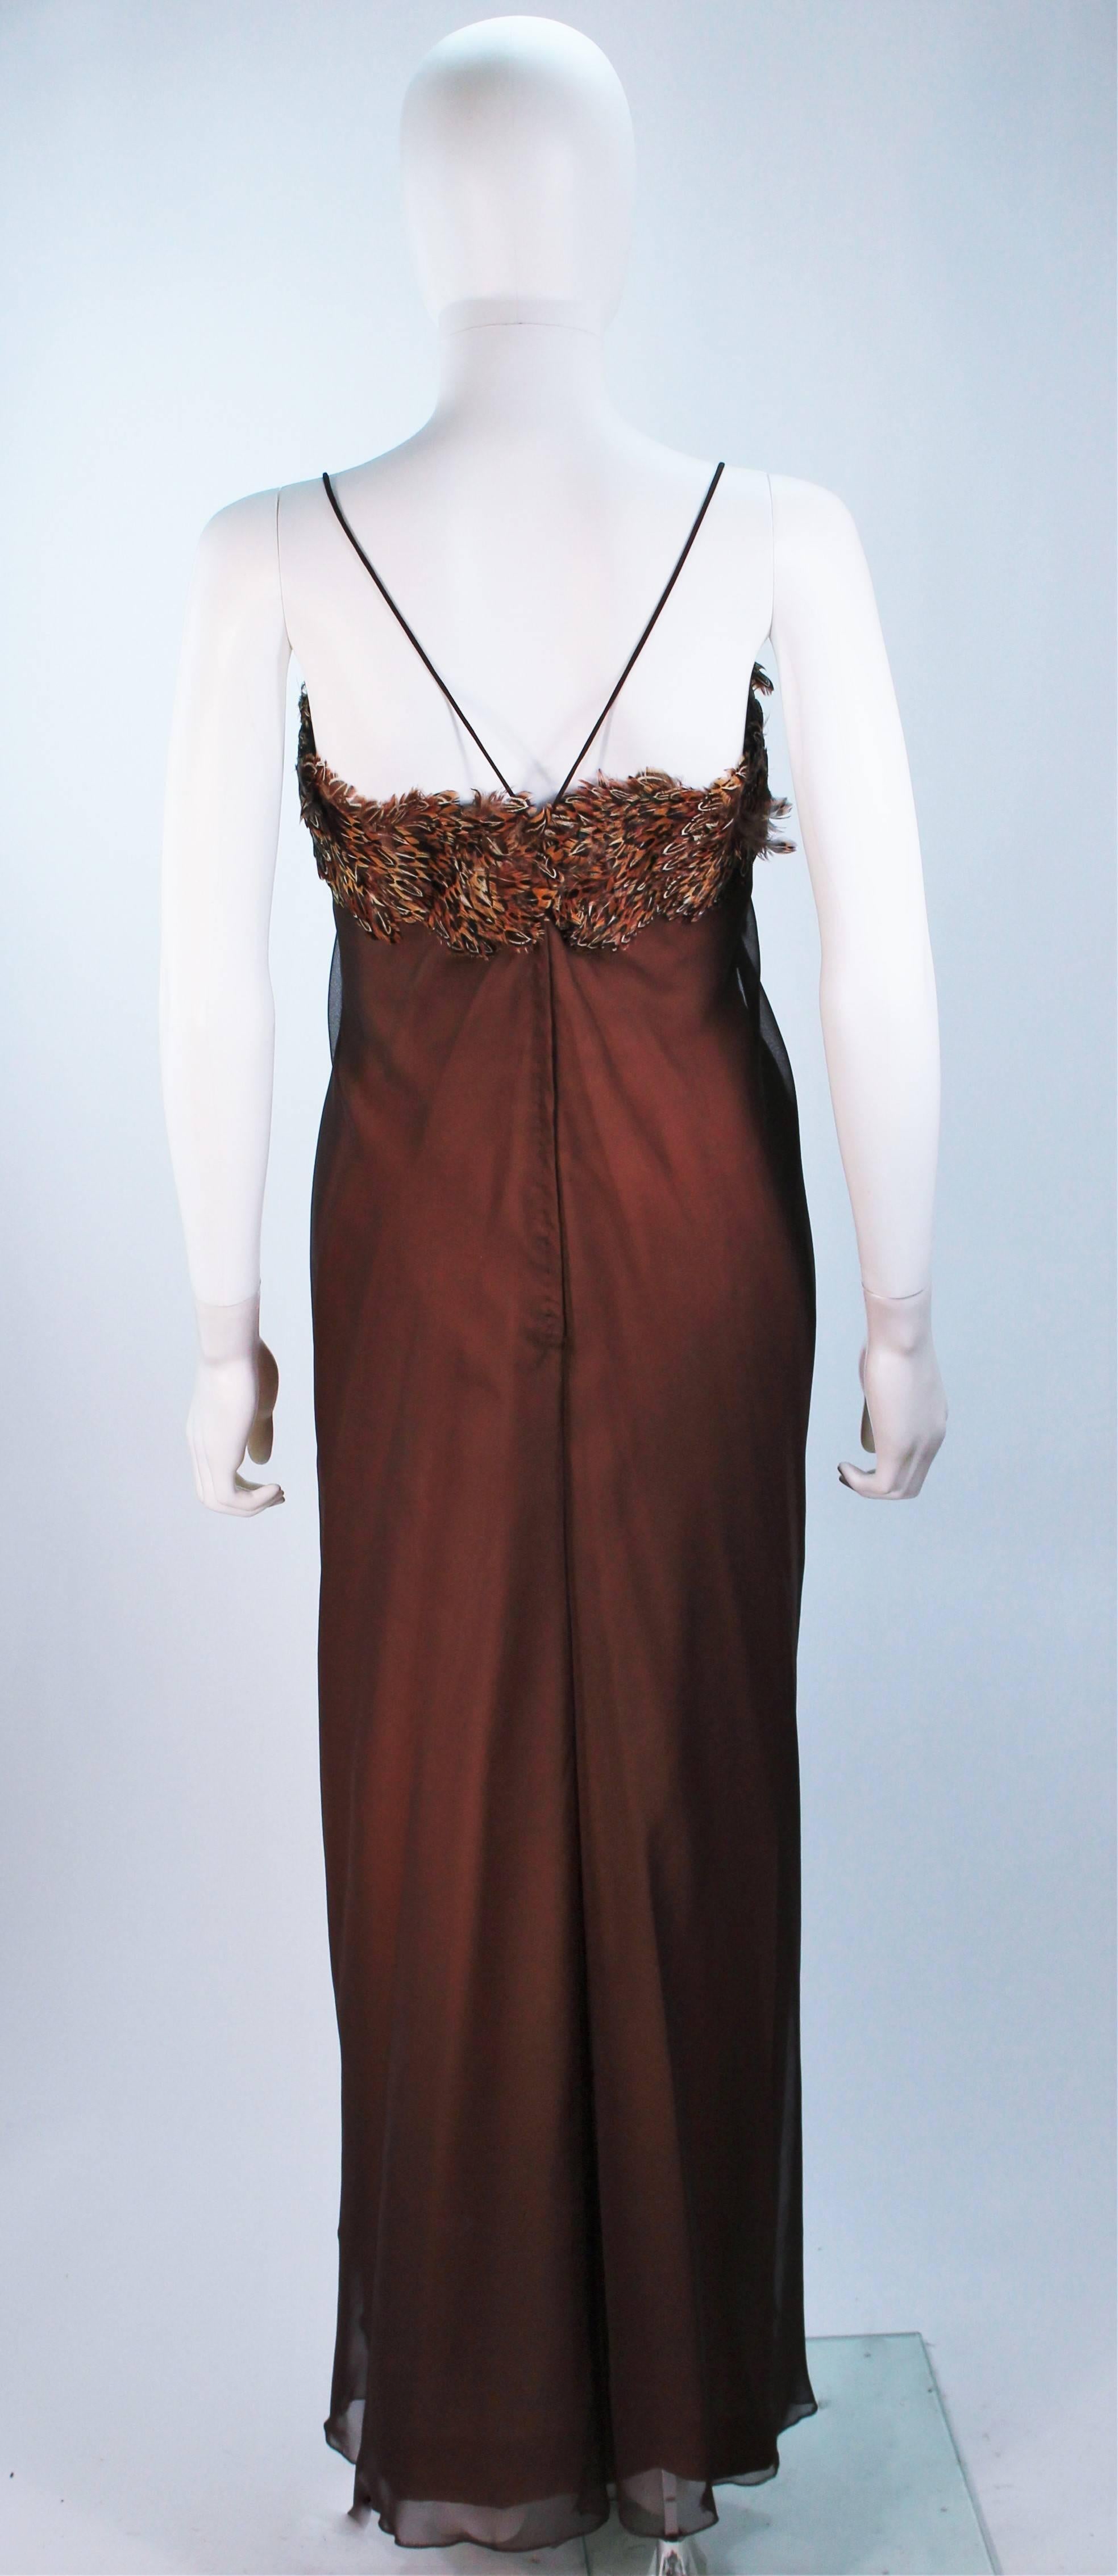 TRAVILLA  Draped Brown Silk Chiffon Gown with Feather Applique Size 8 For Sale 1